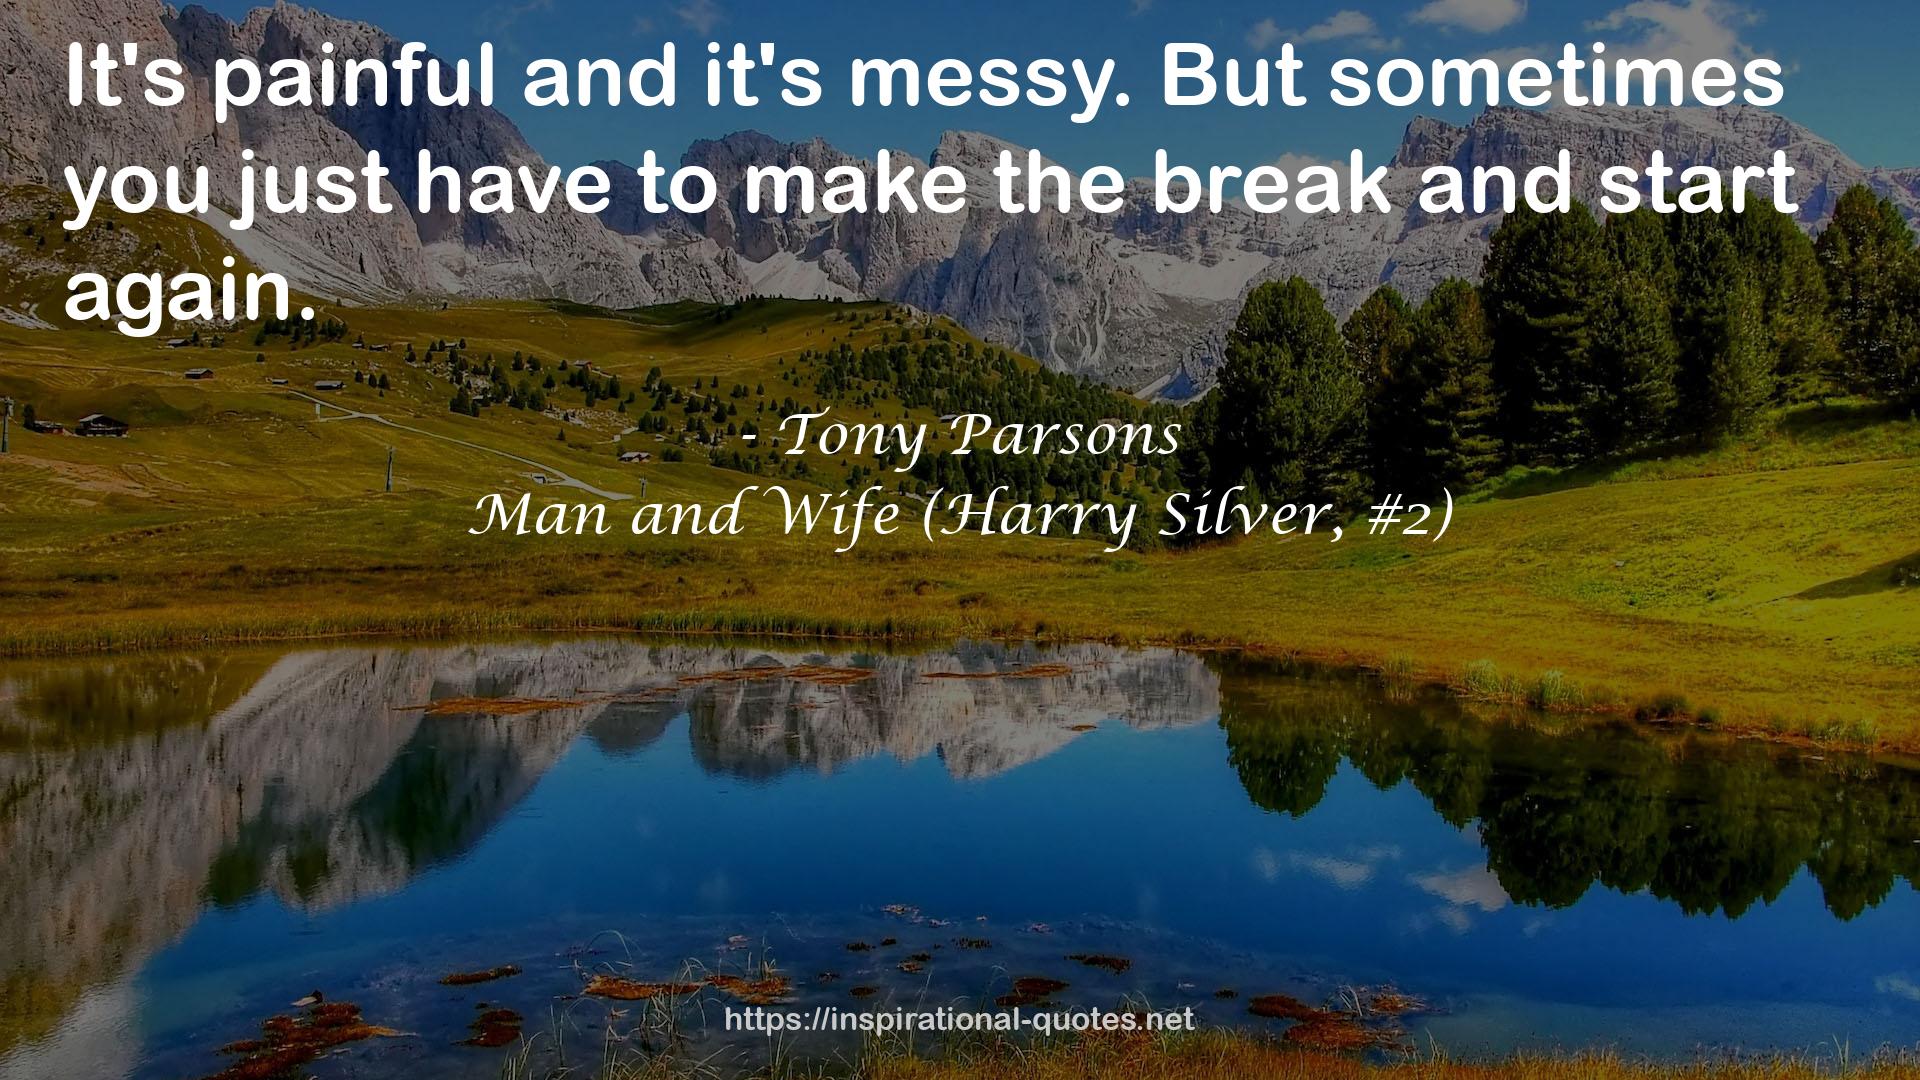 Man and Wife (Harry Silver, #2) QUOTES